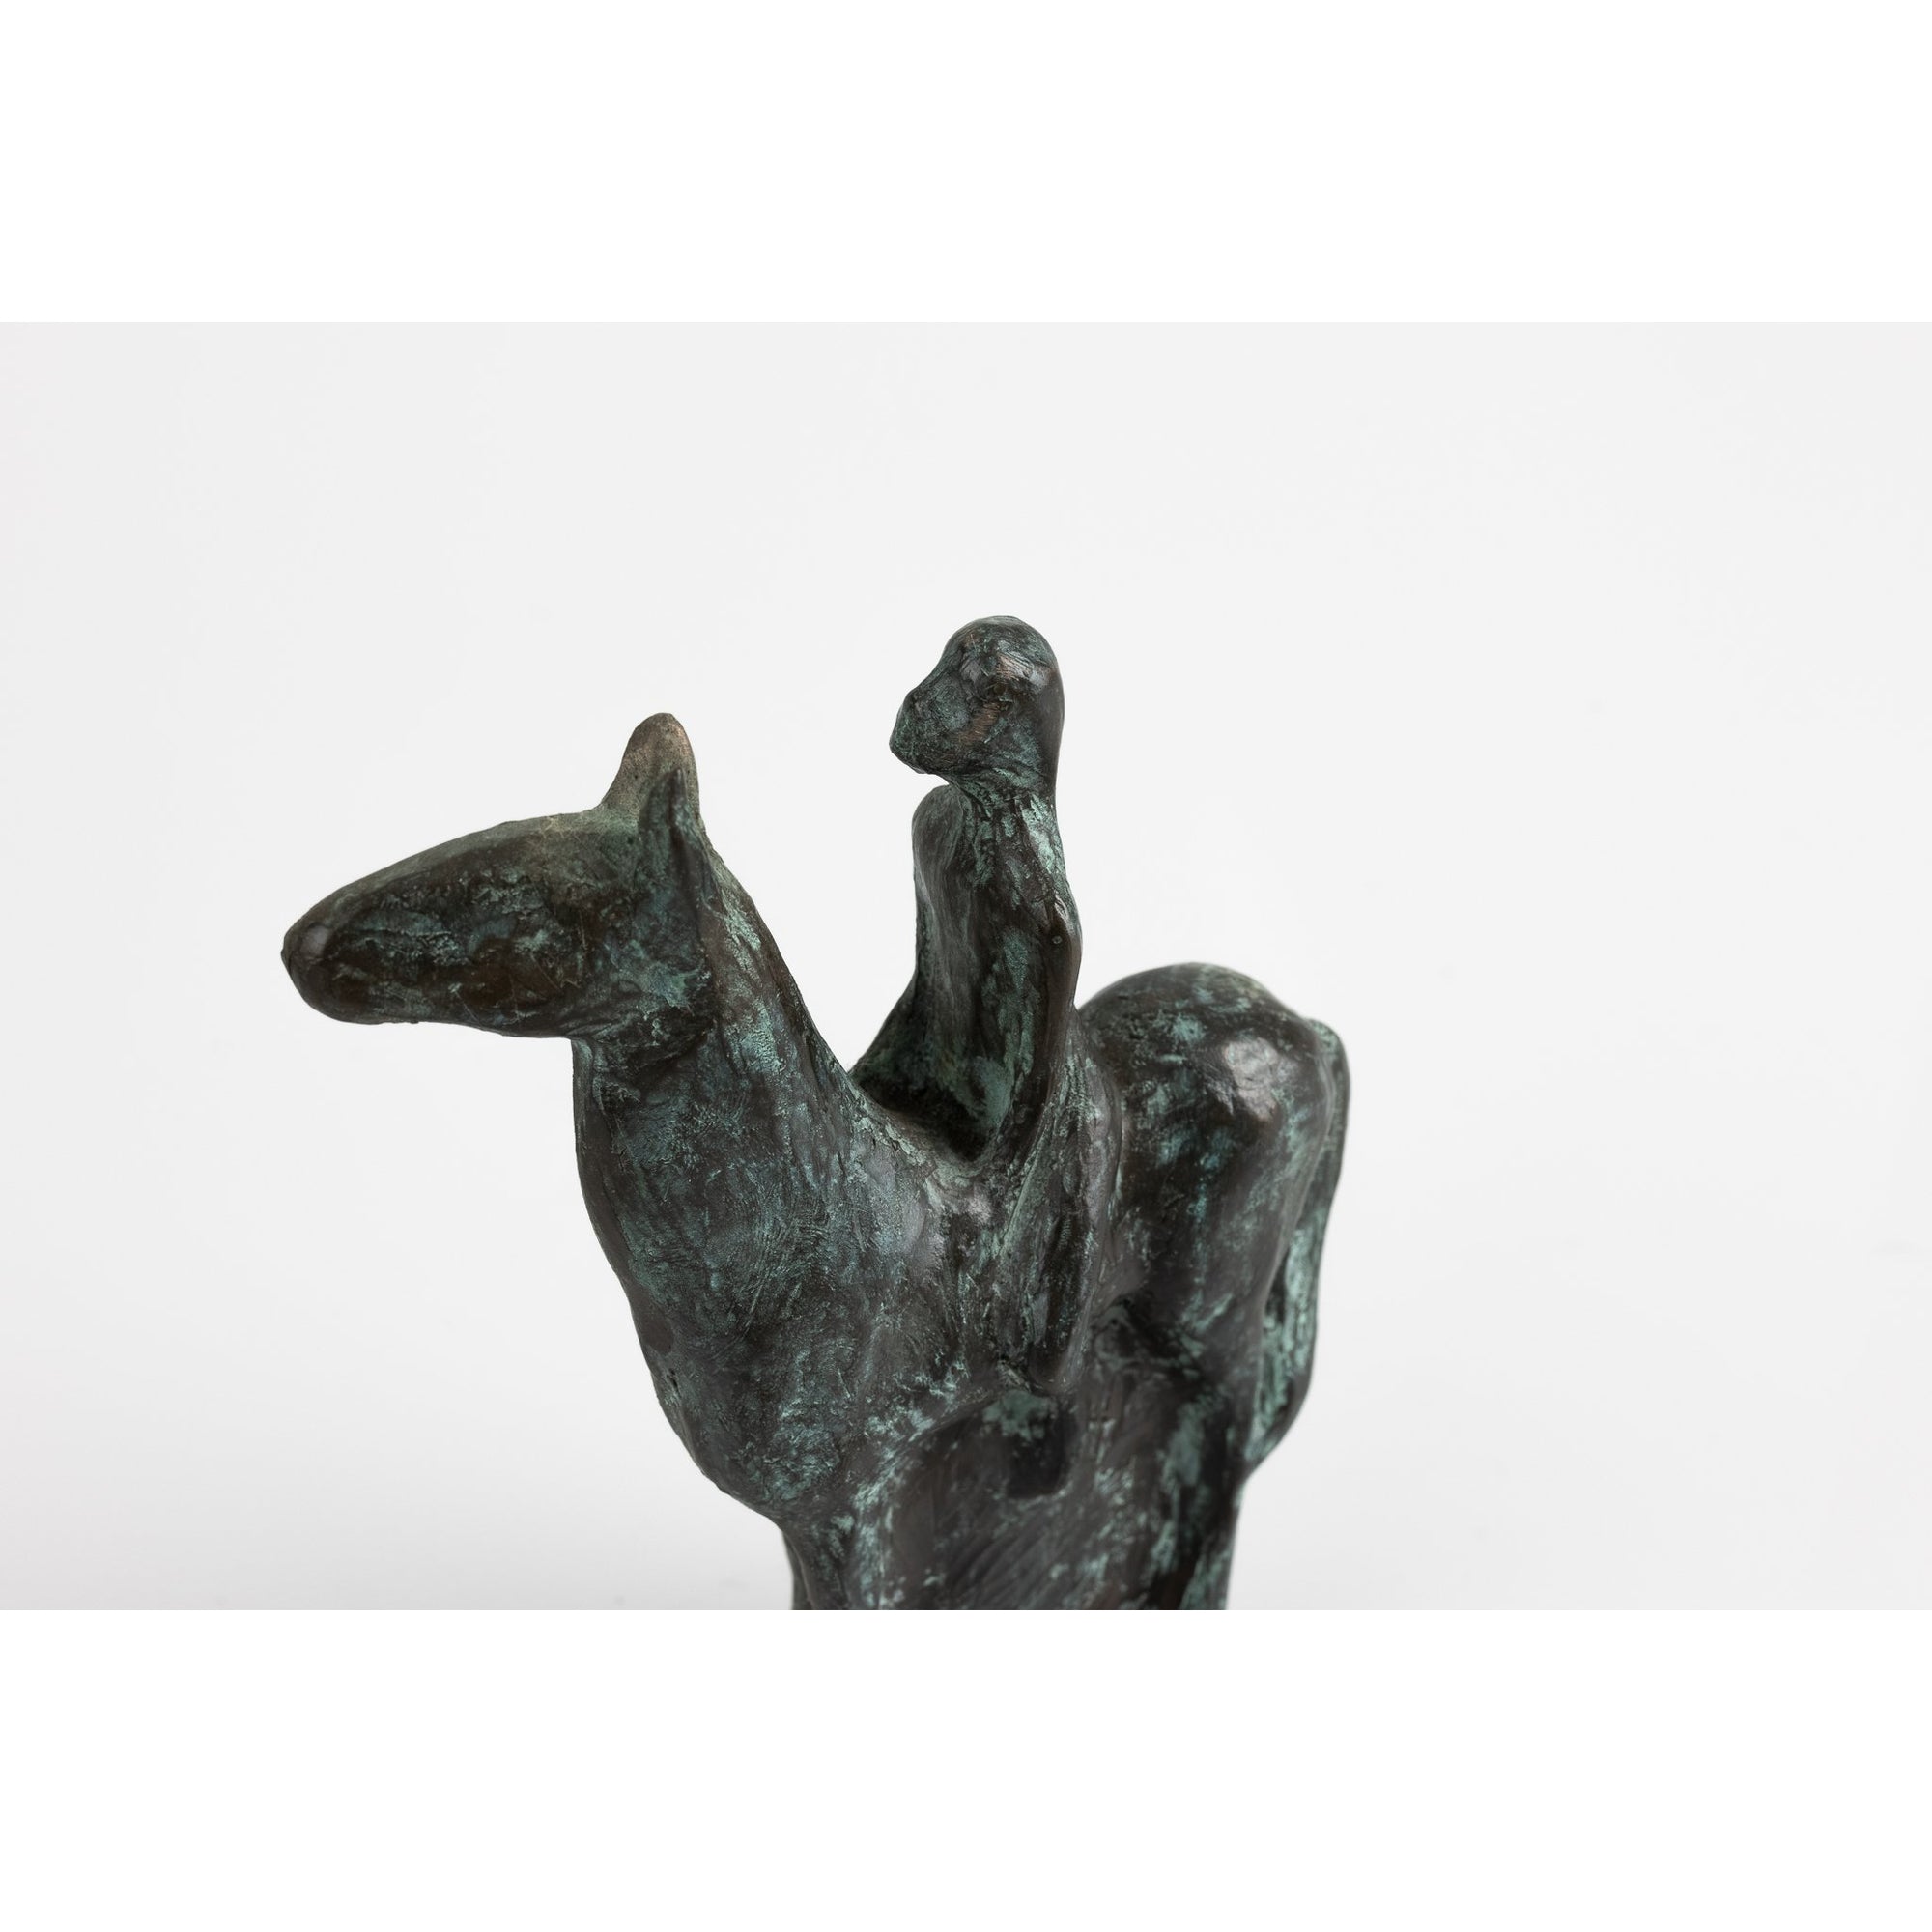 'Sitting' sculpture by Sophie Howard, available at Padstow Gallery, Cornwall